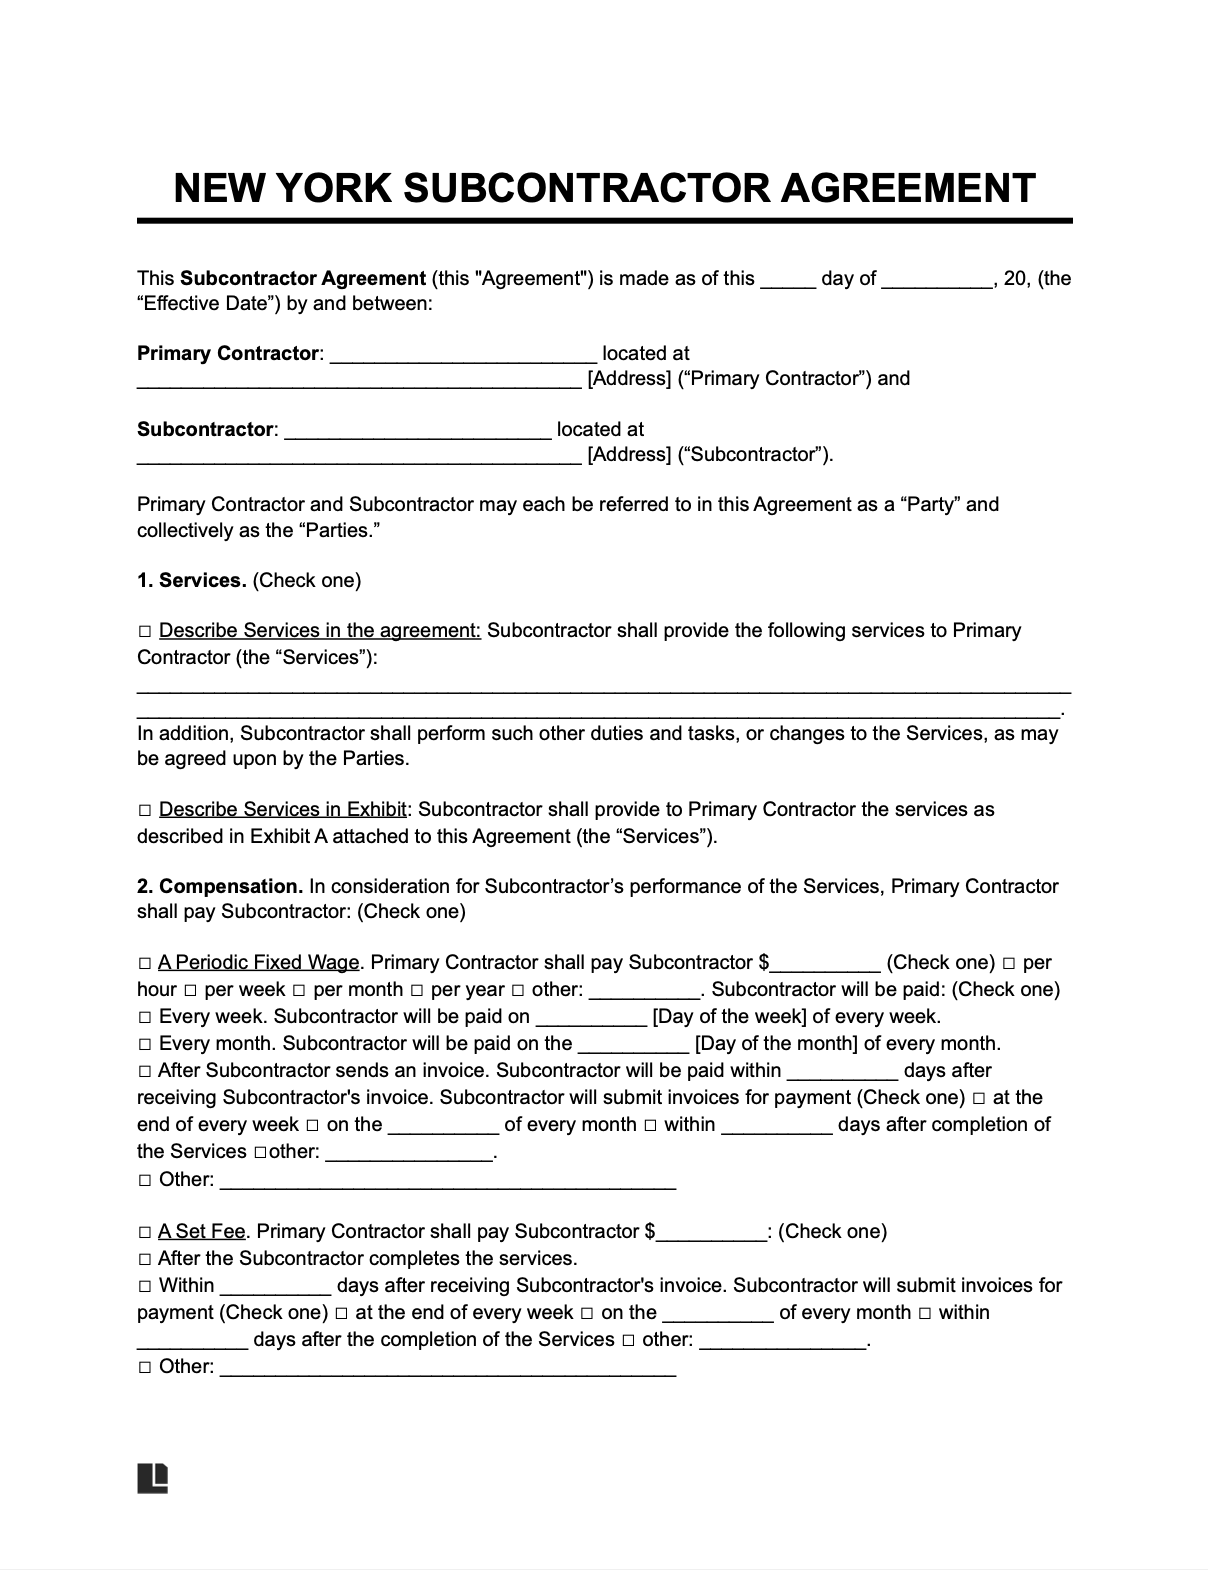 new york subcontractor agreement template